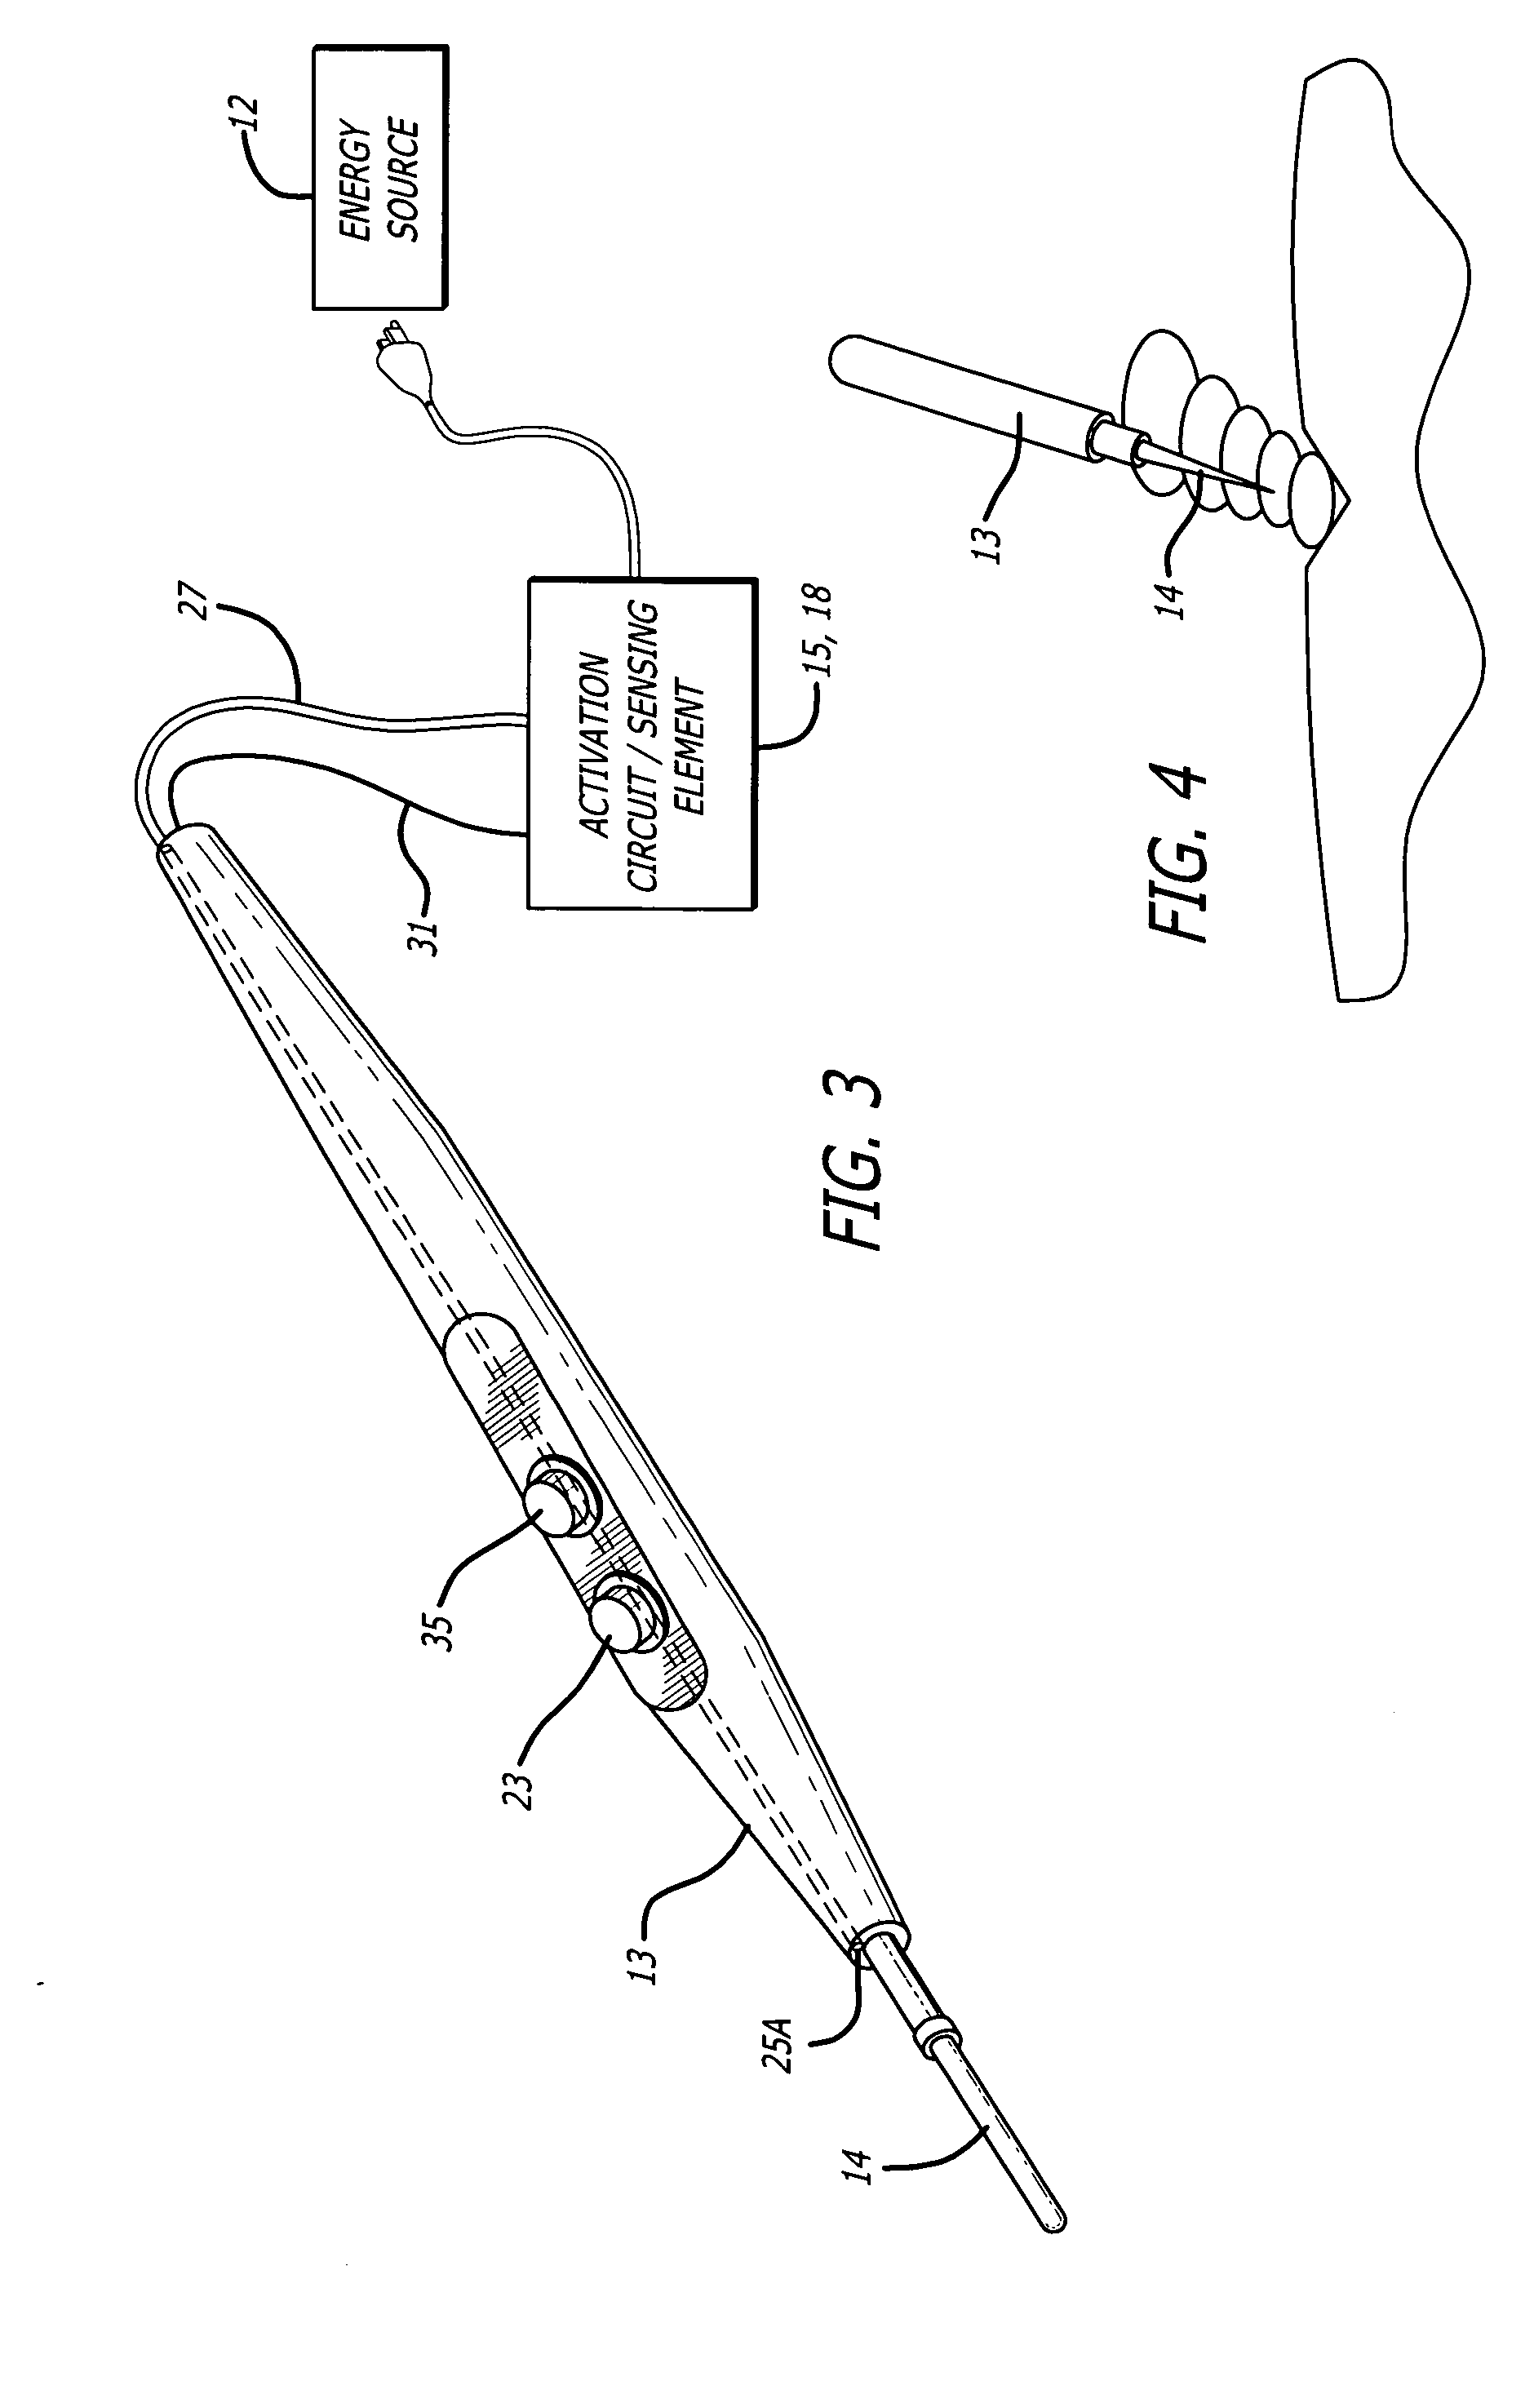 Oxygen sensing during a surgical procedure